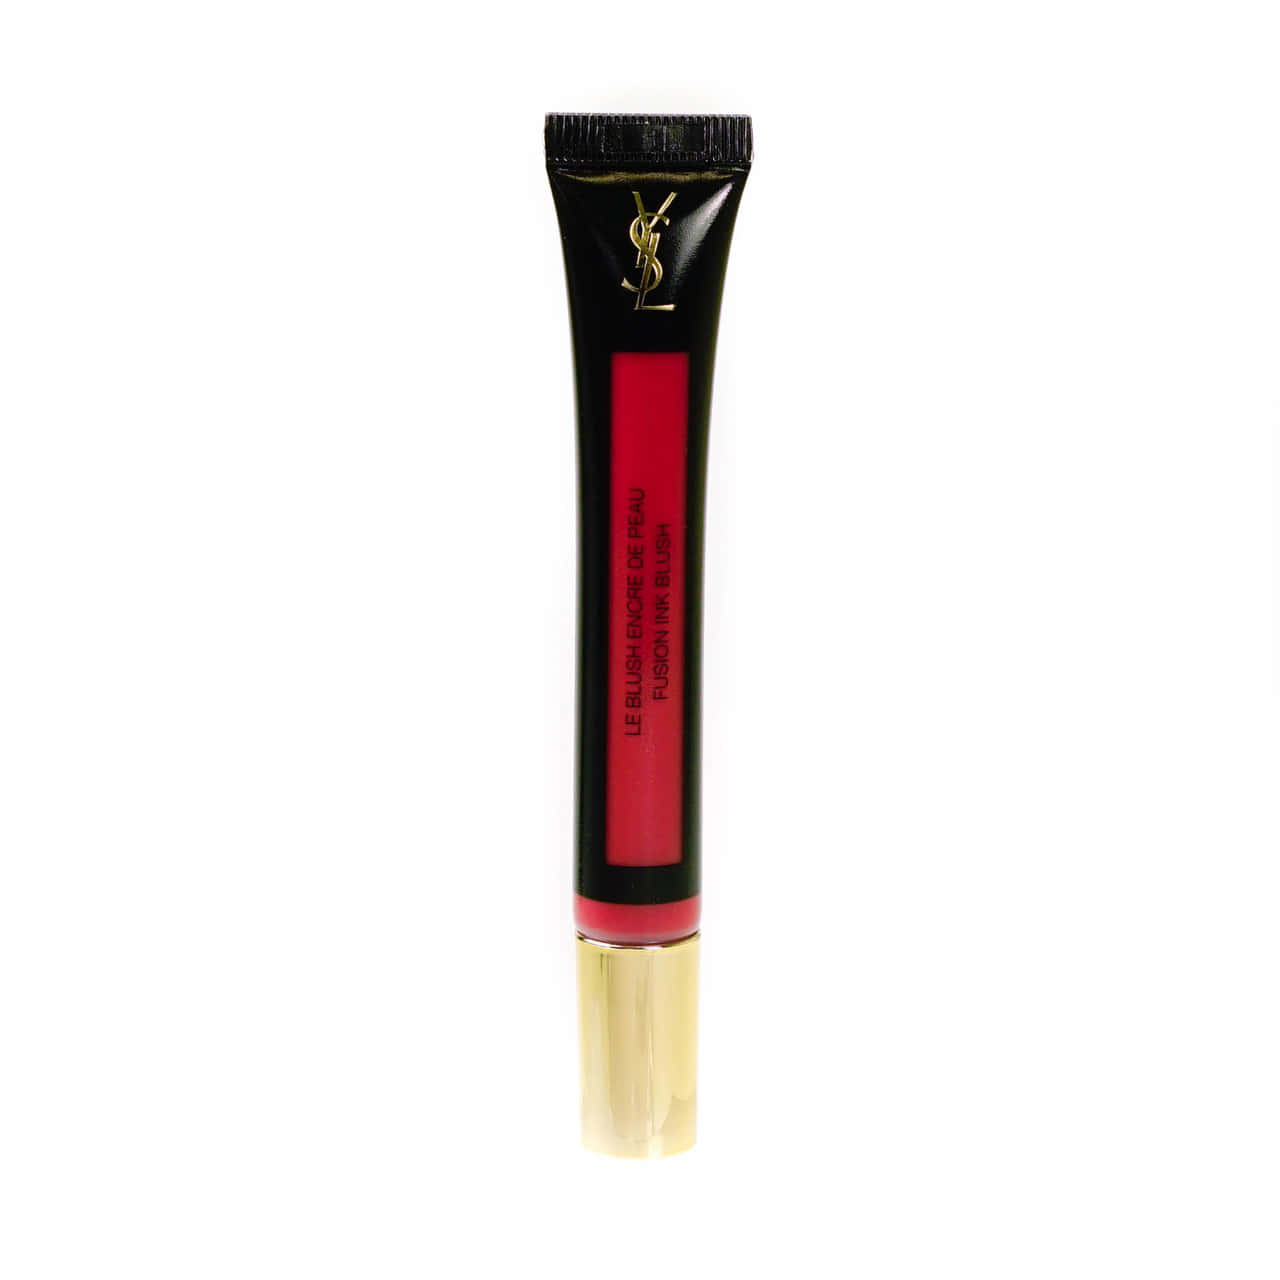 "Feel fabulous in the luxurious fashion of YSL with this distinctive logo backdrop."